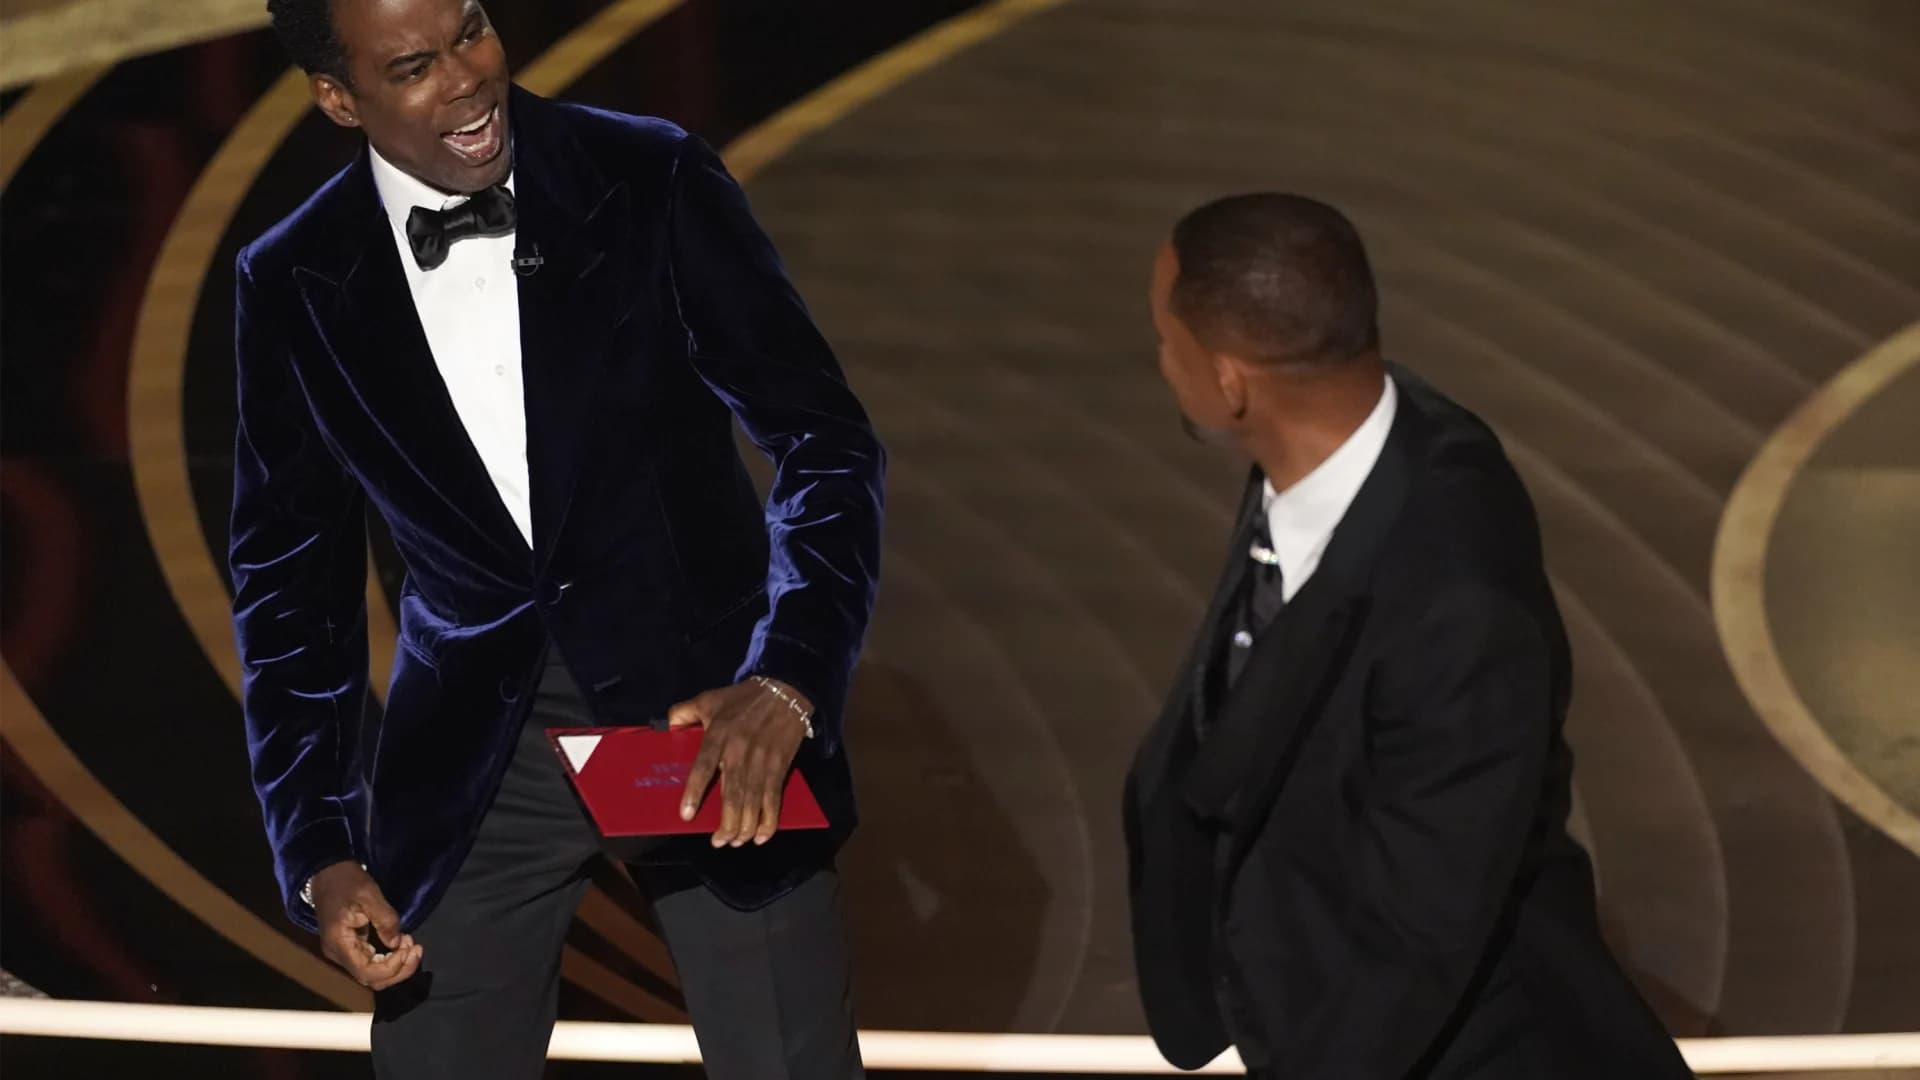 Will Smith resigns from film academy over Chris Rock slap